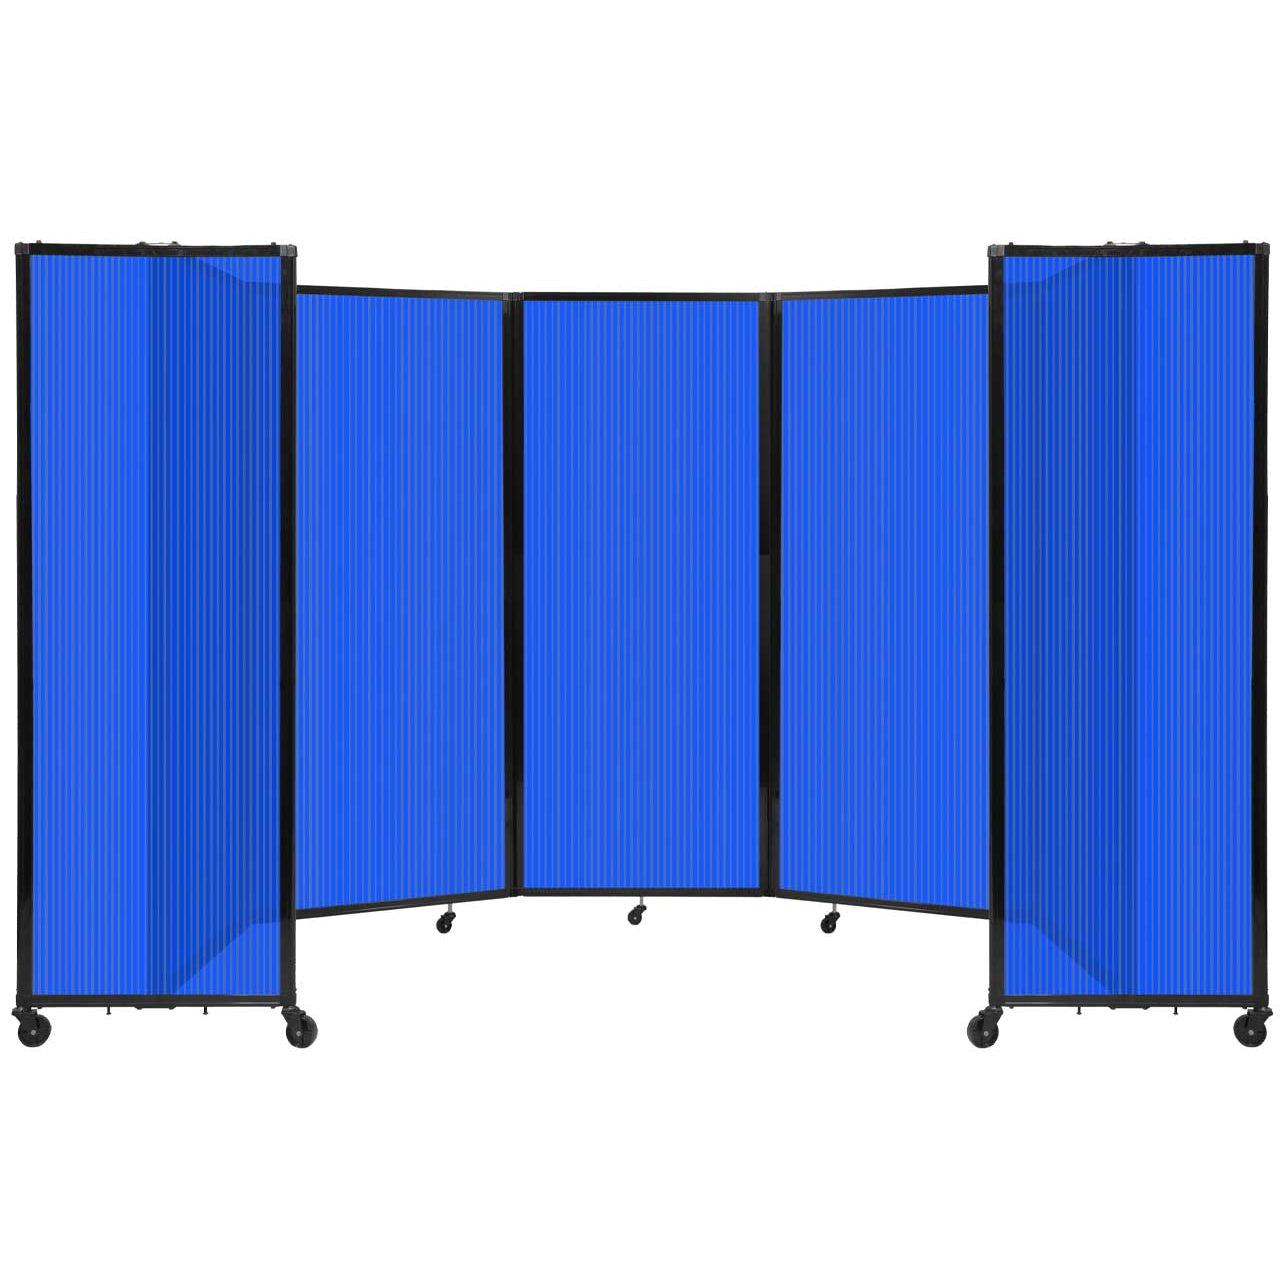 Room Divider 360° Folding Portable Partition with Fluted Polycarbonate Panels, 14' W x 6' 10" H